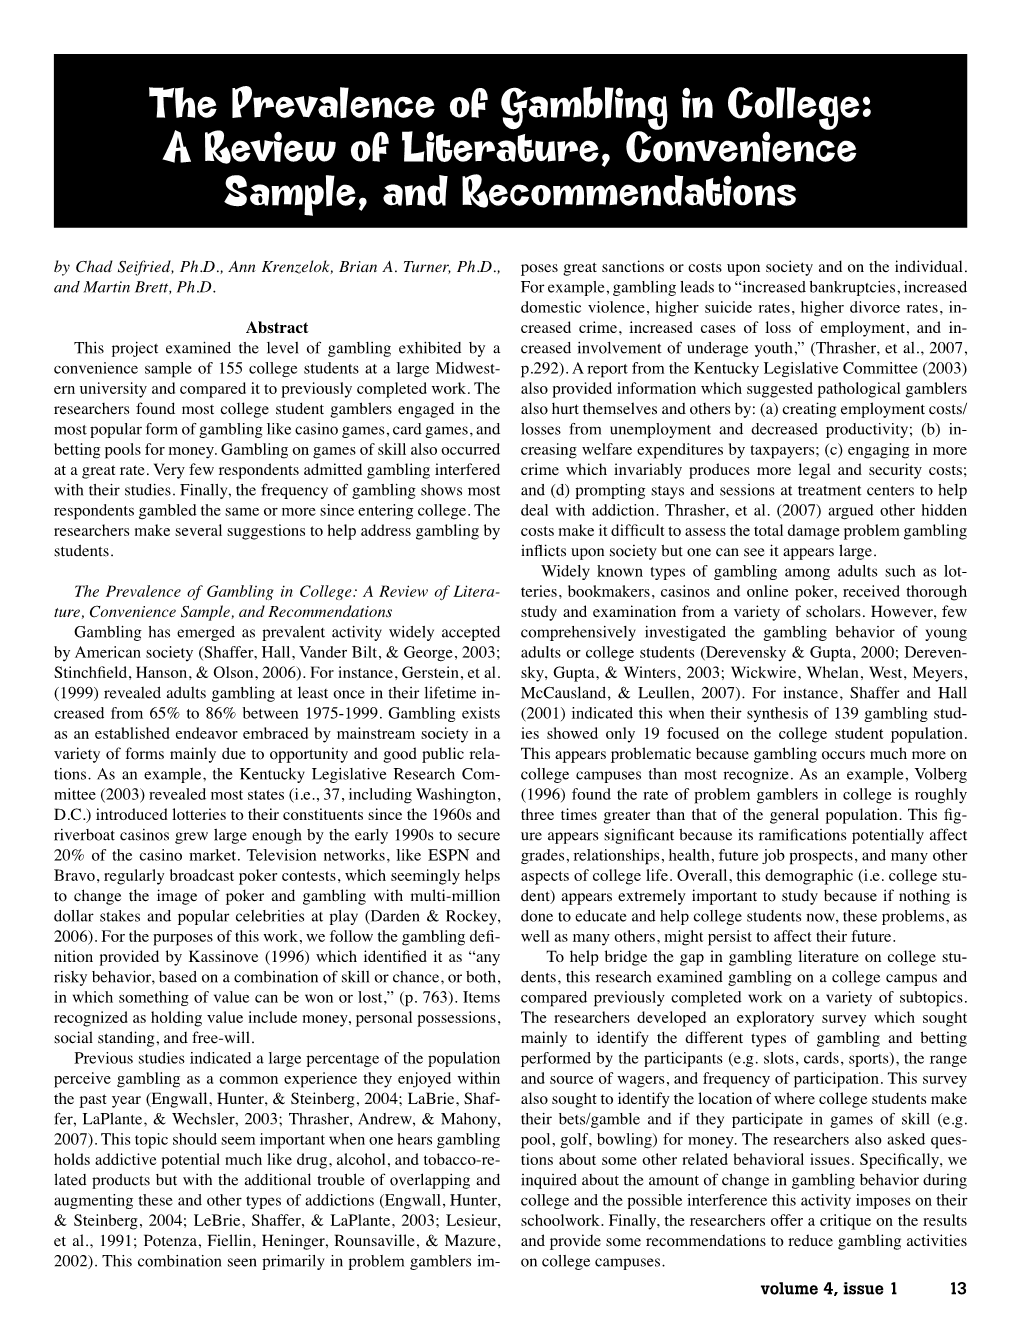 The Prevalence of Gambling in College: a Review of Literature, Convenience Sample, and Recommendations by Chad Seifried, Ph.D., Ann Krenzelok, Brian A